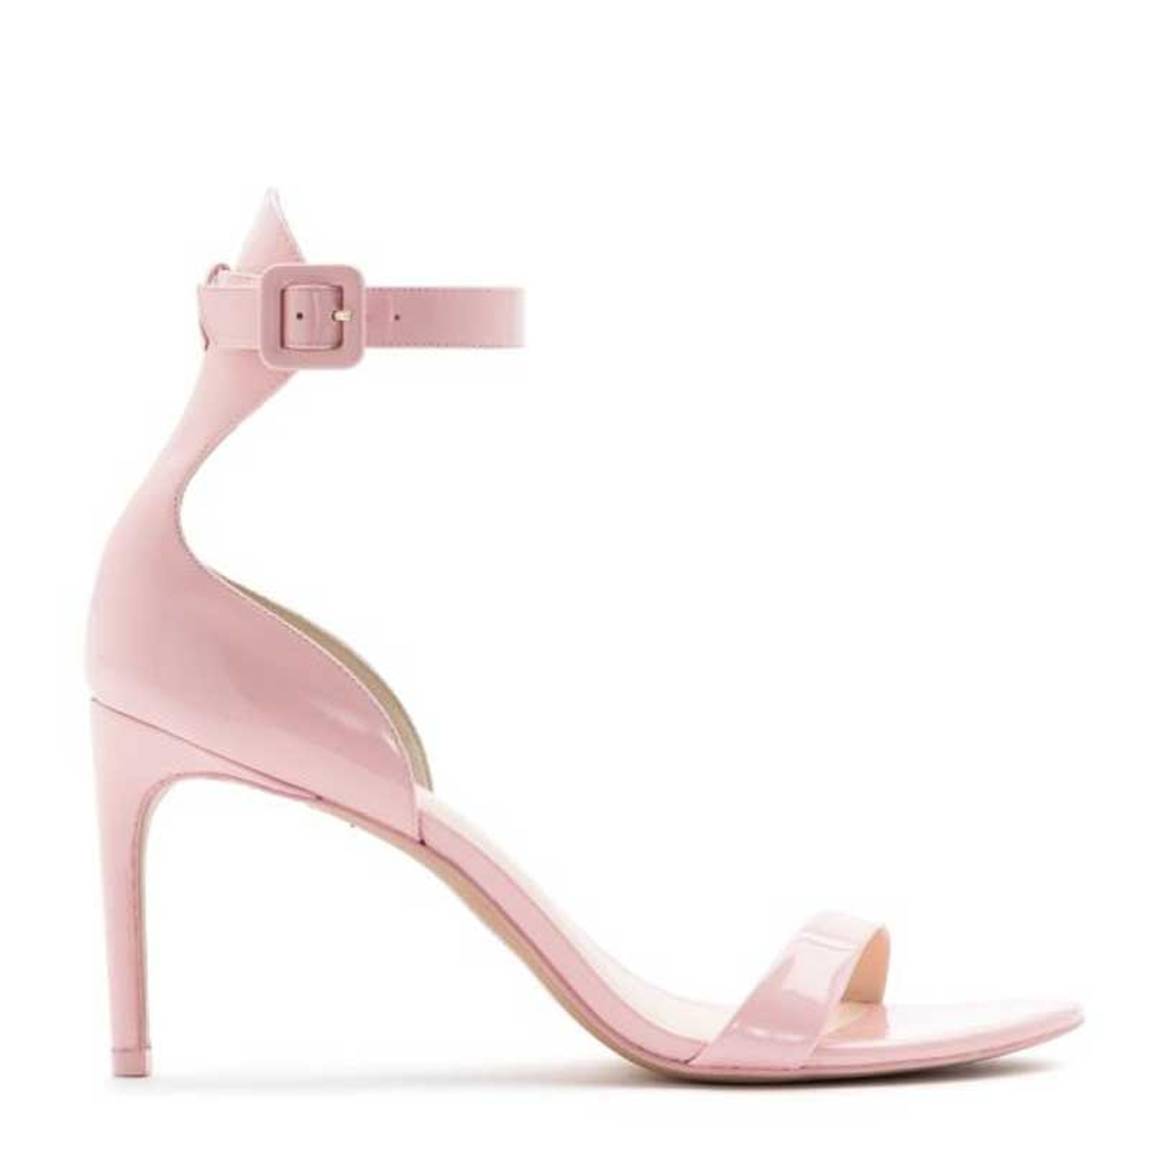 Sophia Webster’s new shoe collection offers high end looks for less